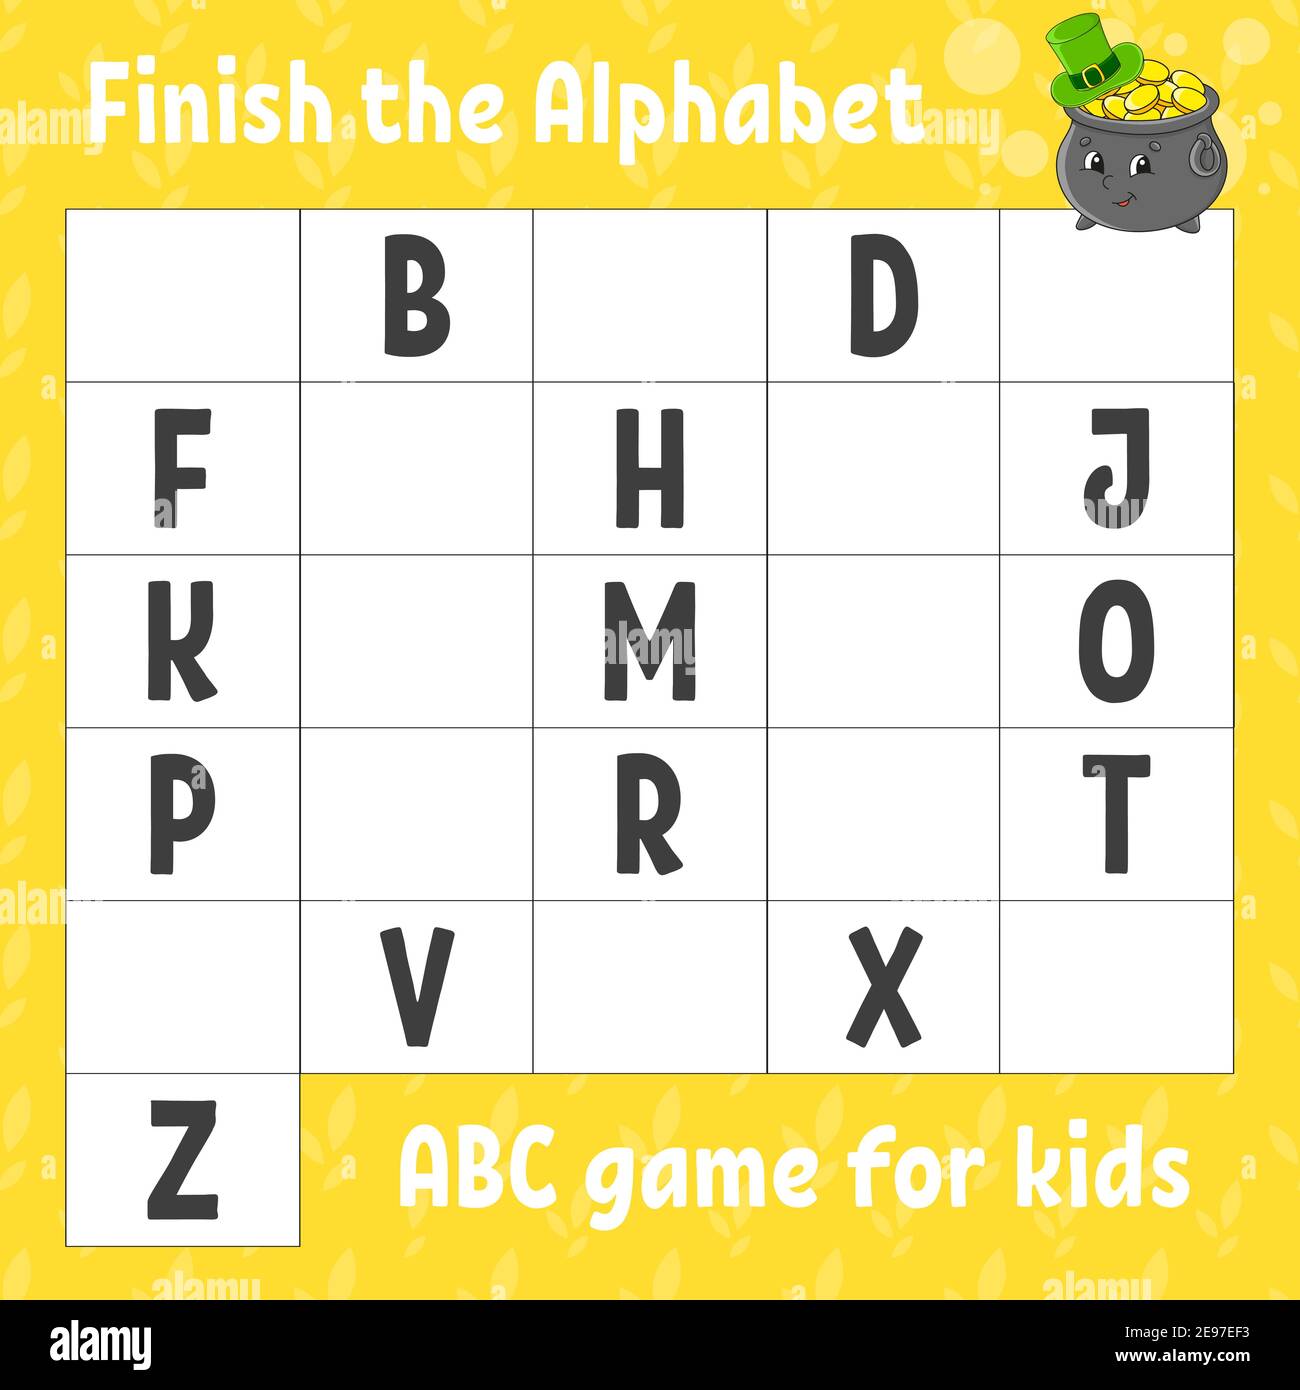 Finish the alphabet. ABC game for kids. Education developing worksheet ...